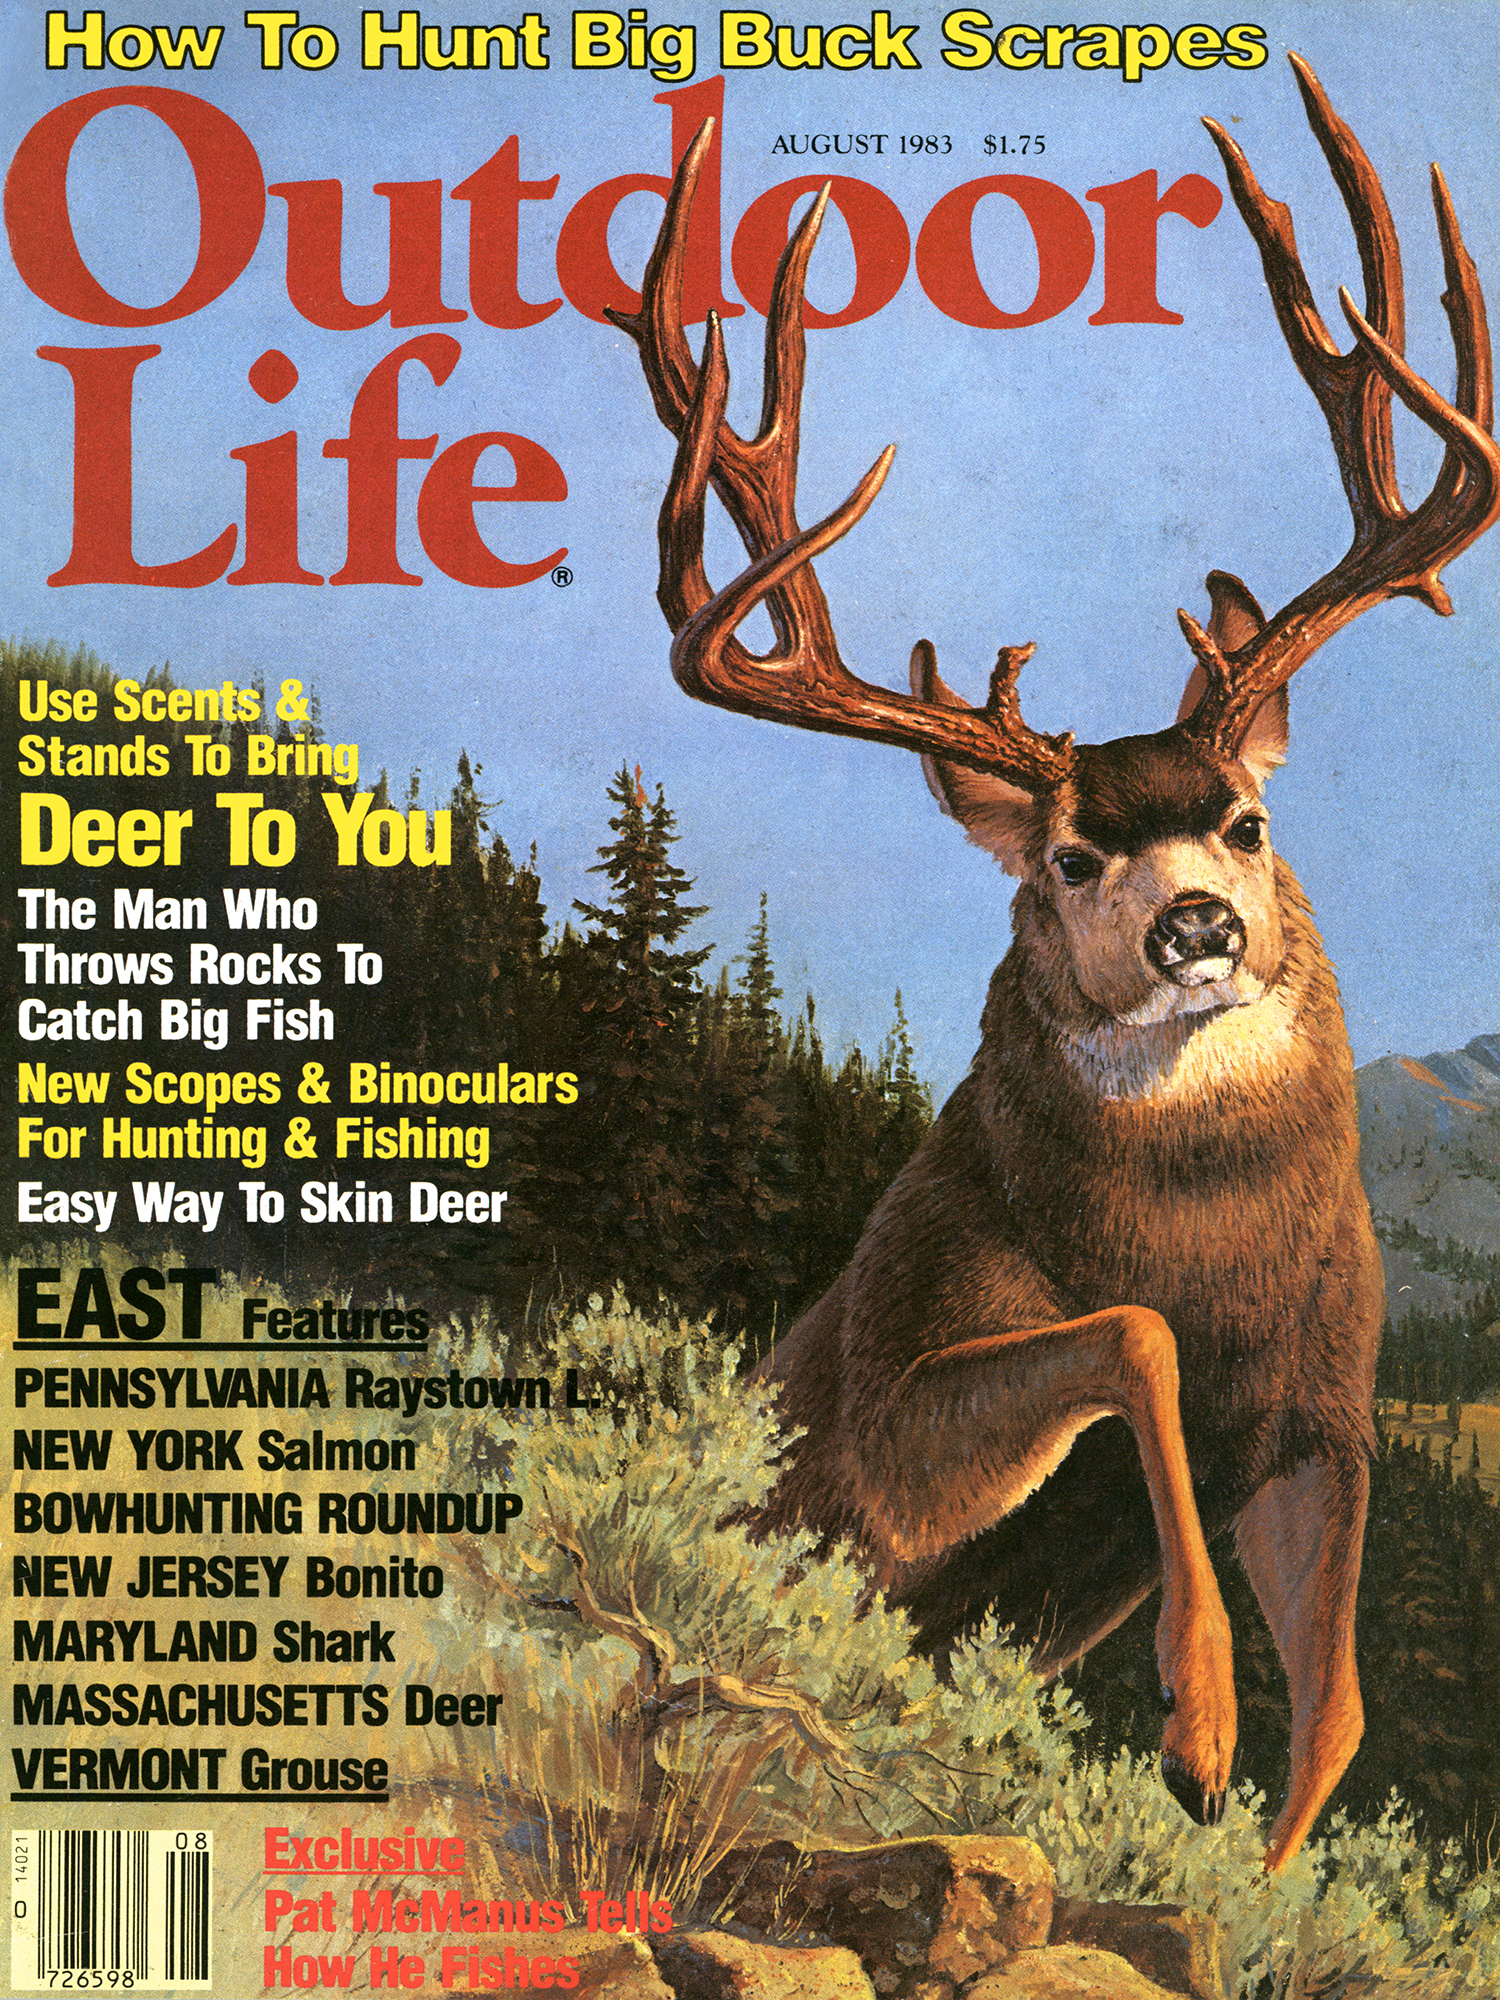 August 1983: Illustrated covers became the exception rather than the norm in the 1980s.